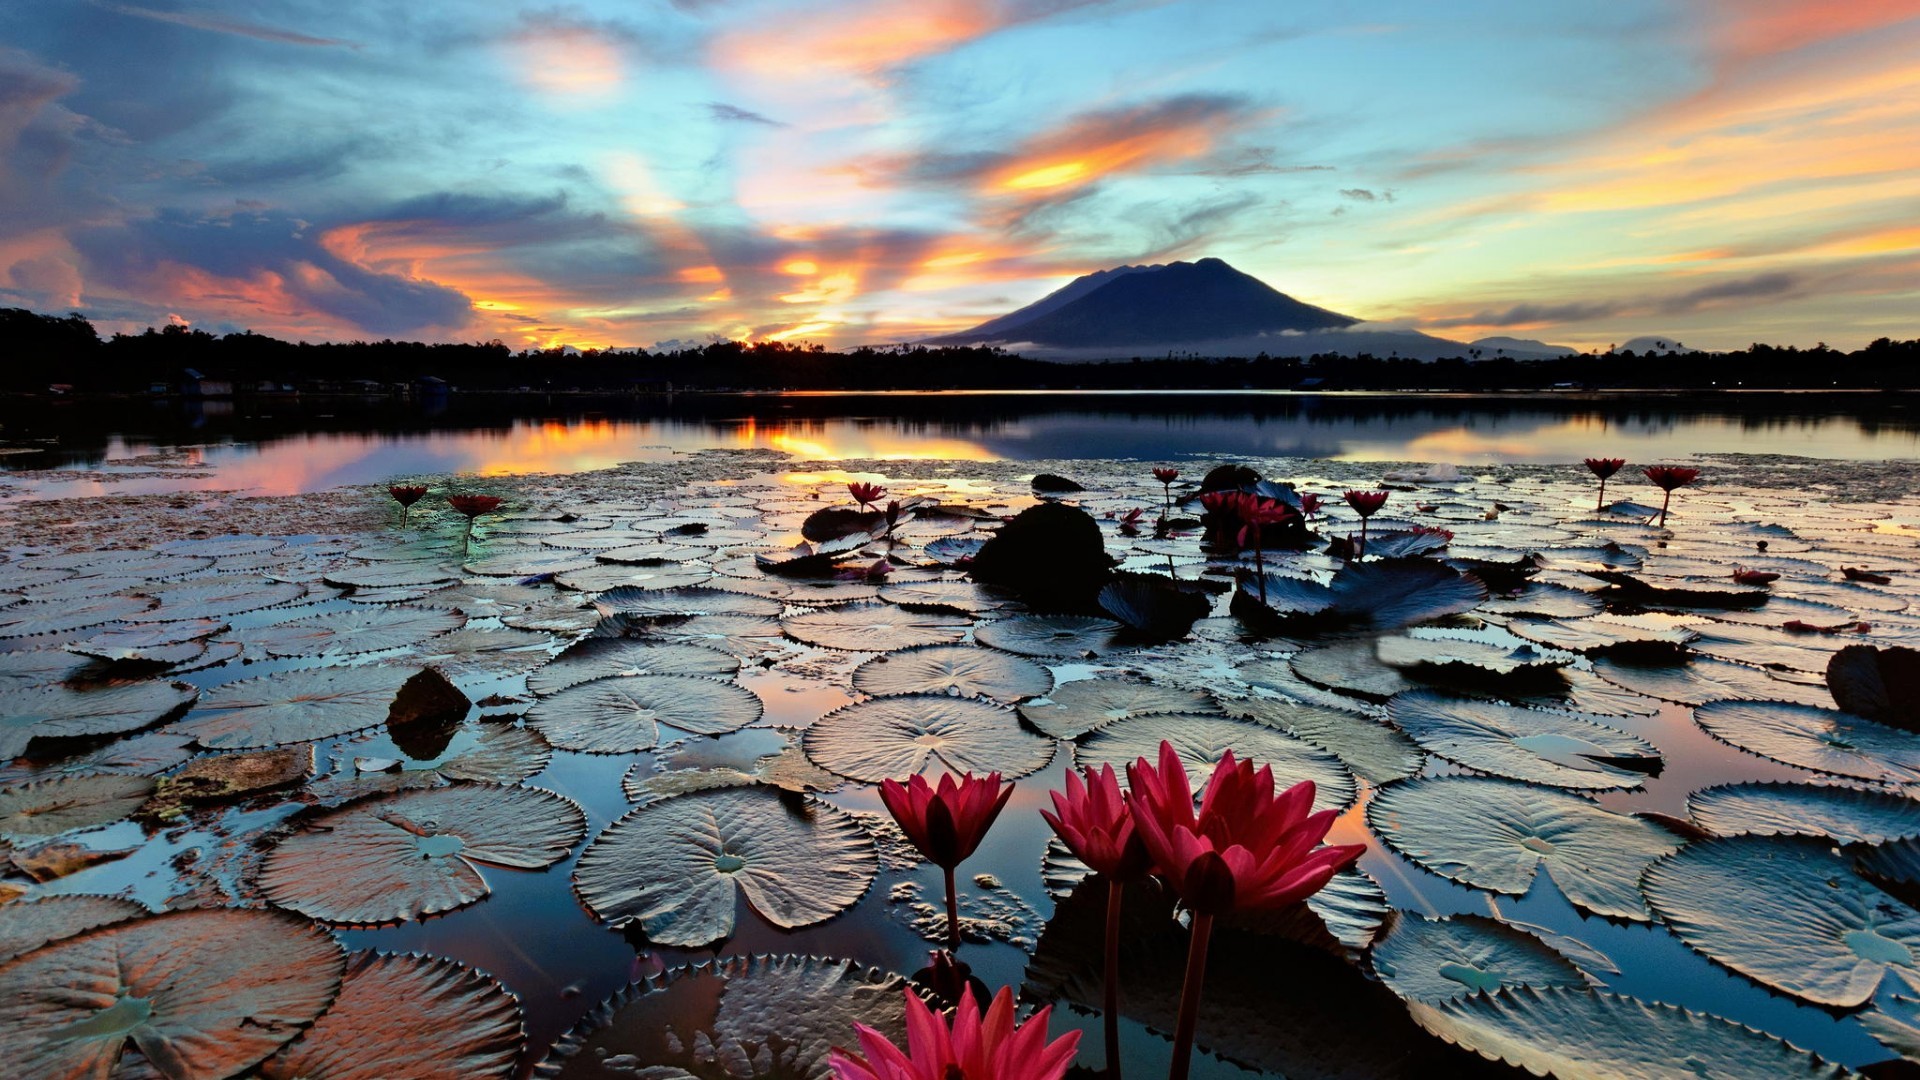 General 1920x1080 nature landscape water lake hills trees flowers lotus flowers forest mist clouds sunset reflection silhouette leaves house water lilies Philippines